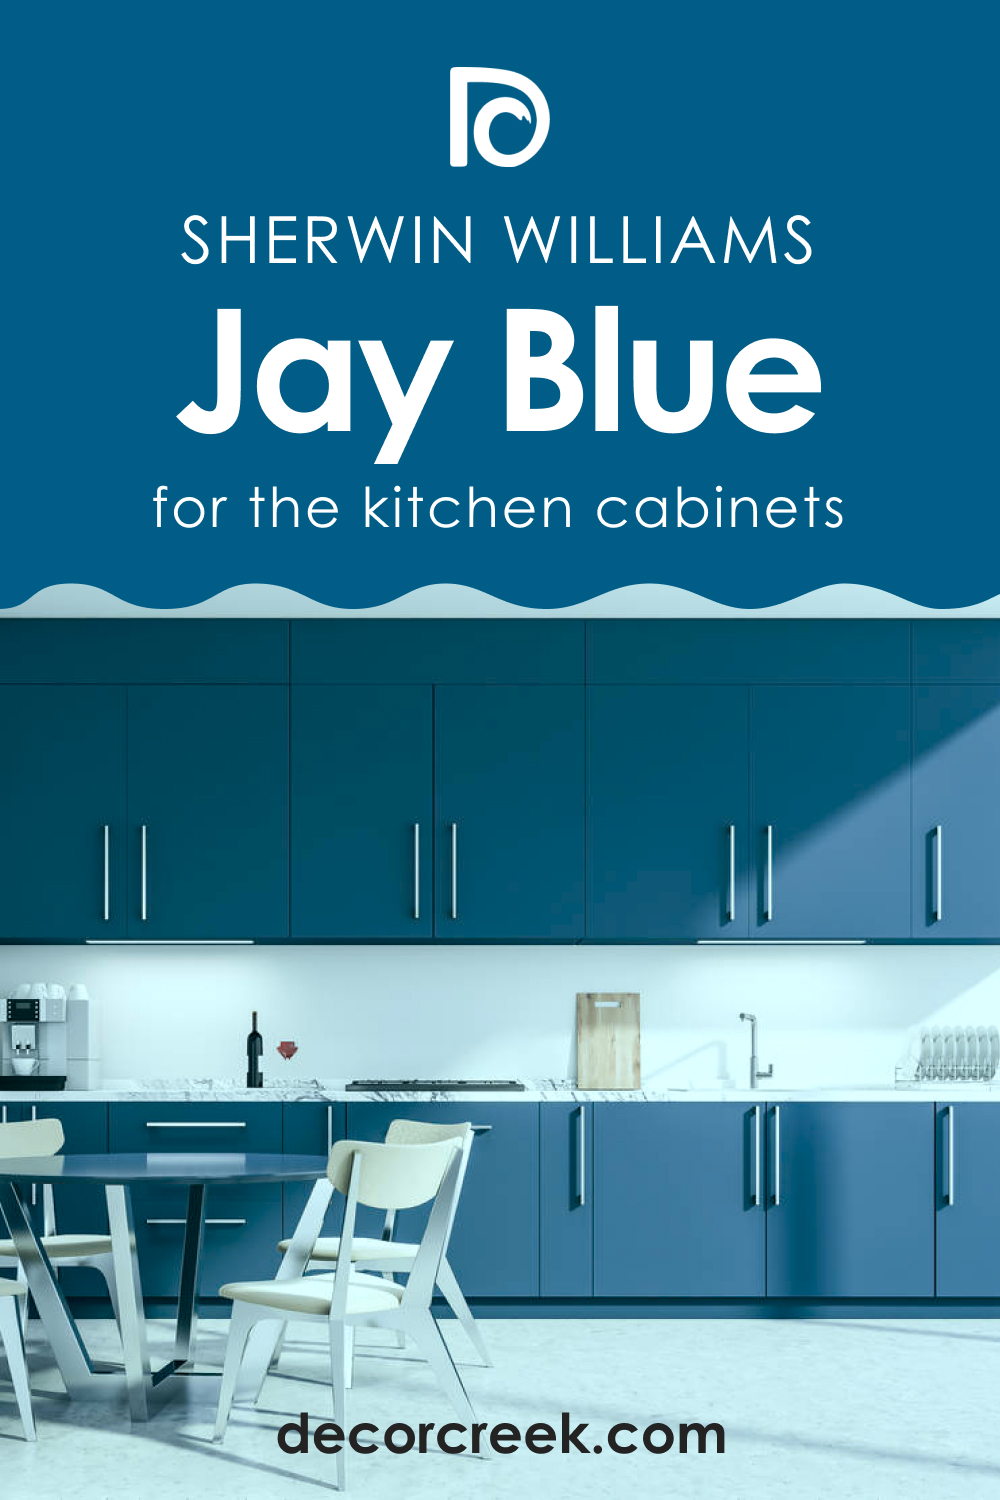 How to Use SW 6797 Jay Blue for the Kitchen Cabinets?